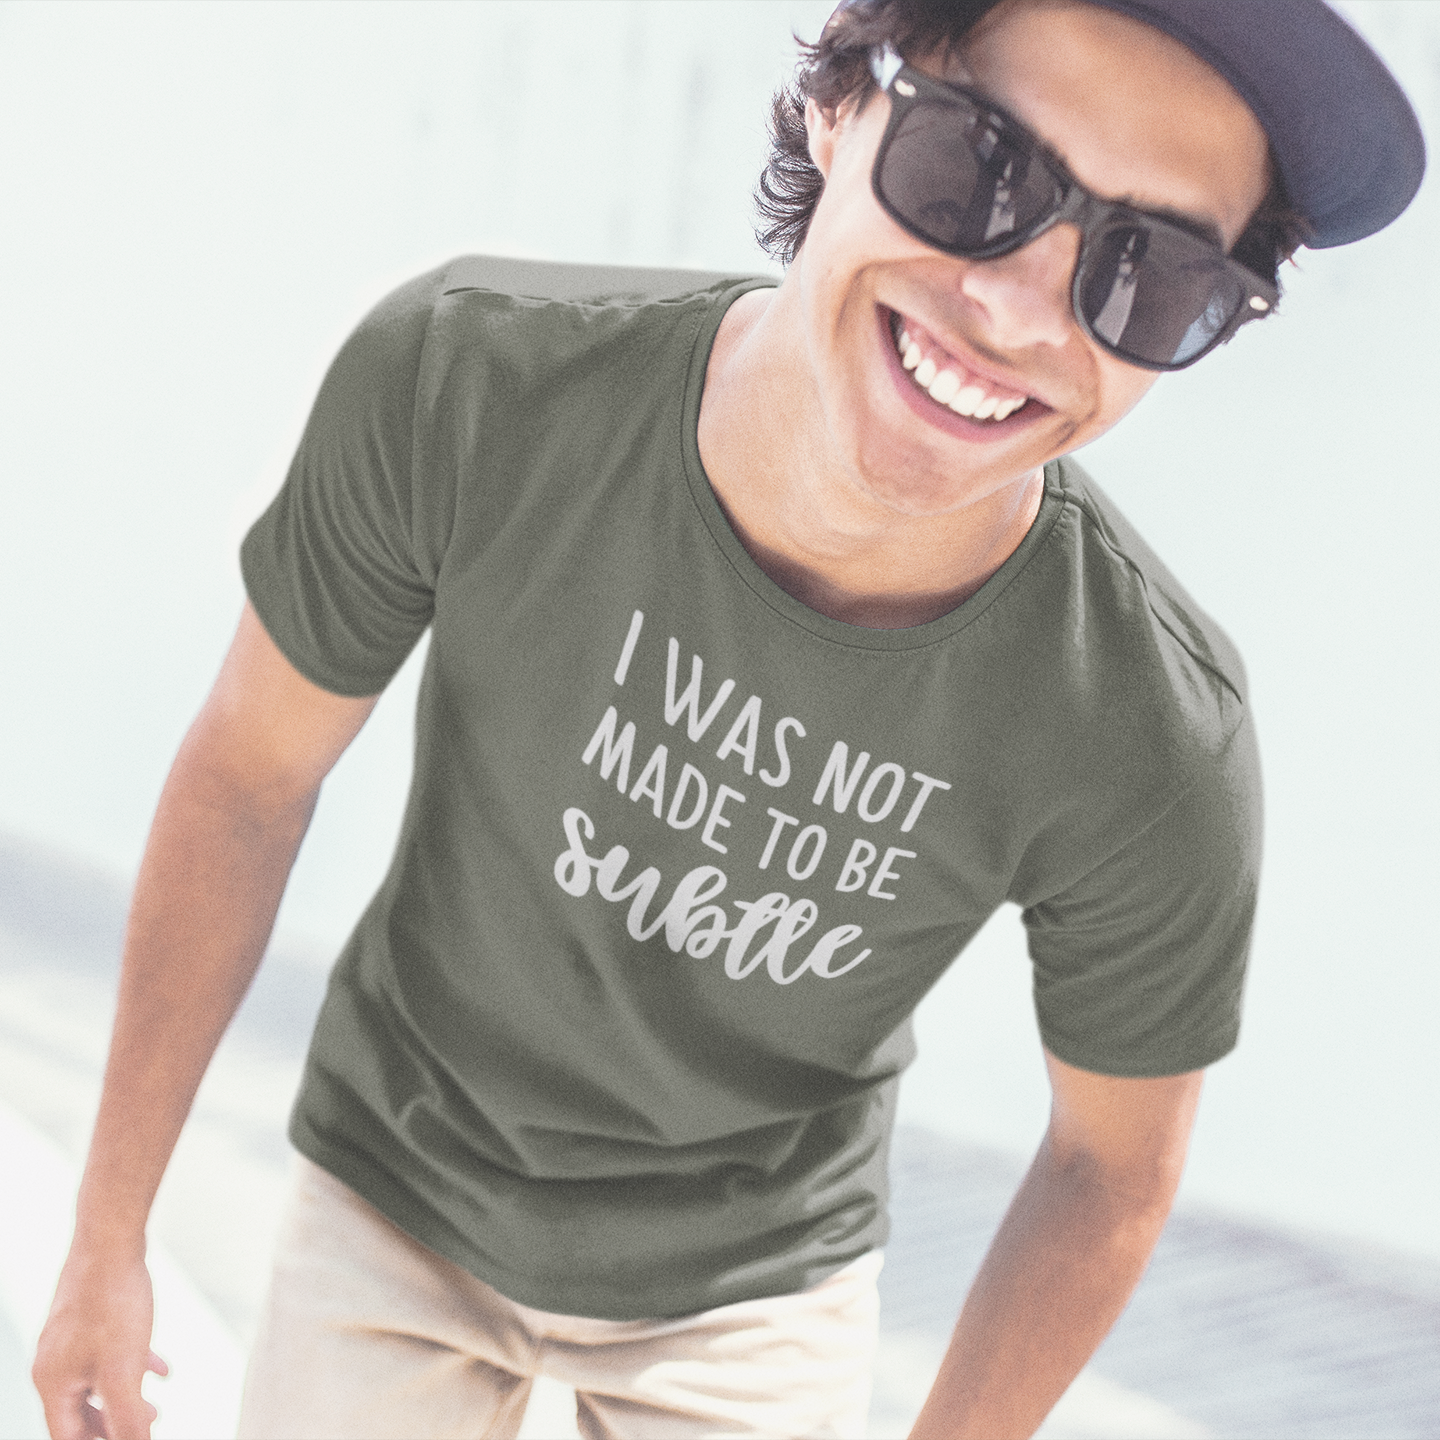 'I was not made to be sublte' adult shirt